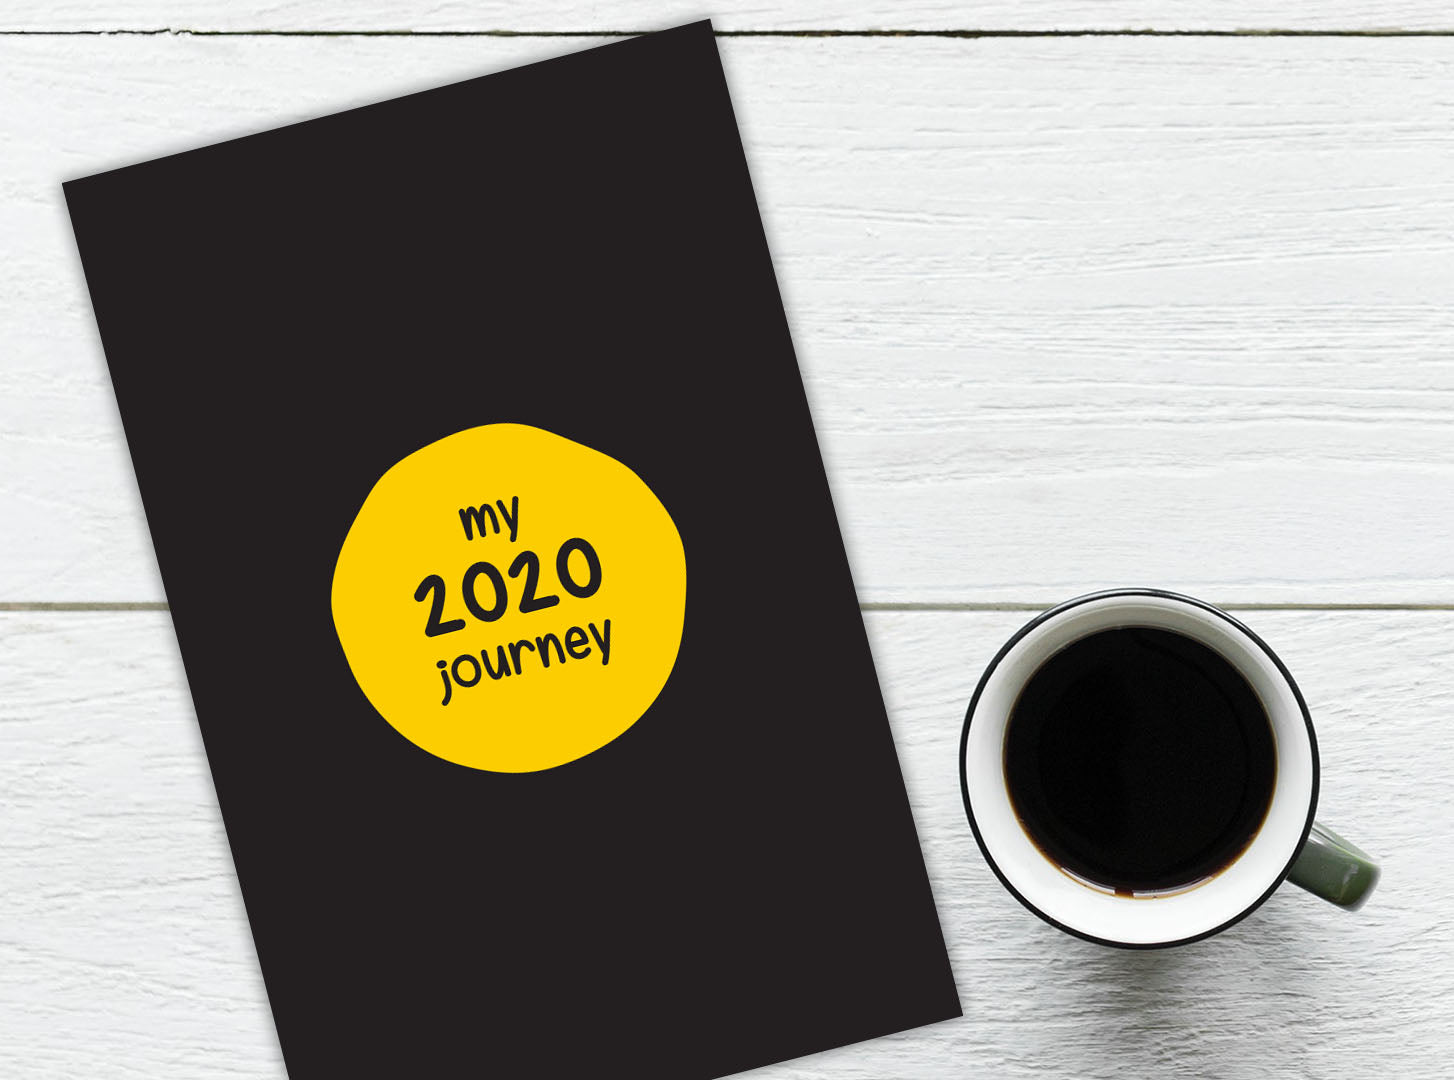 A special 2020 journal